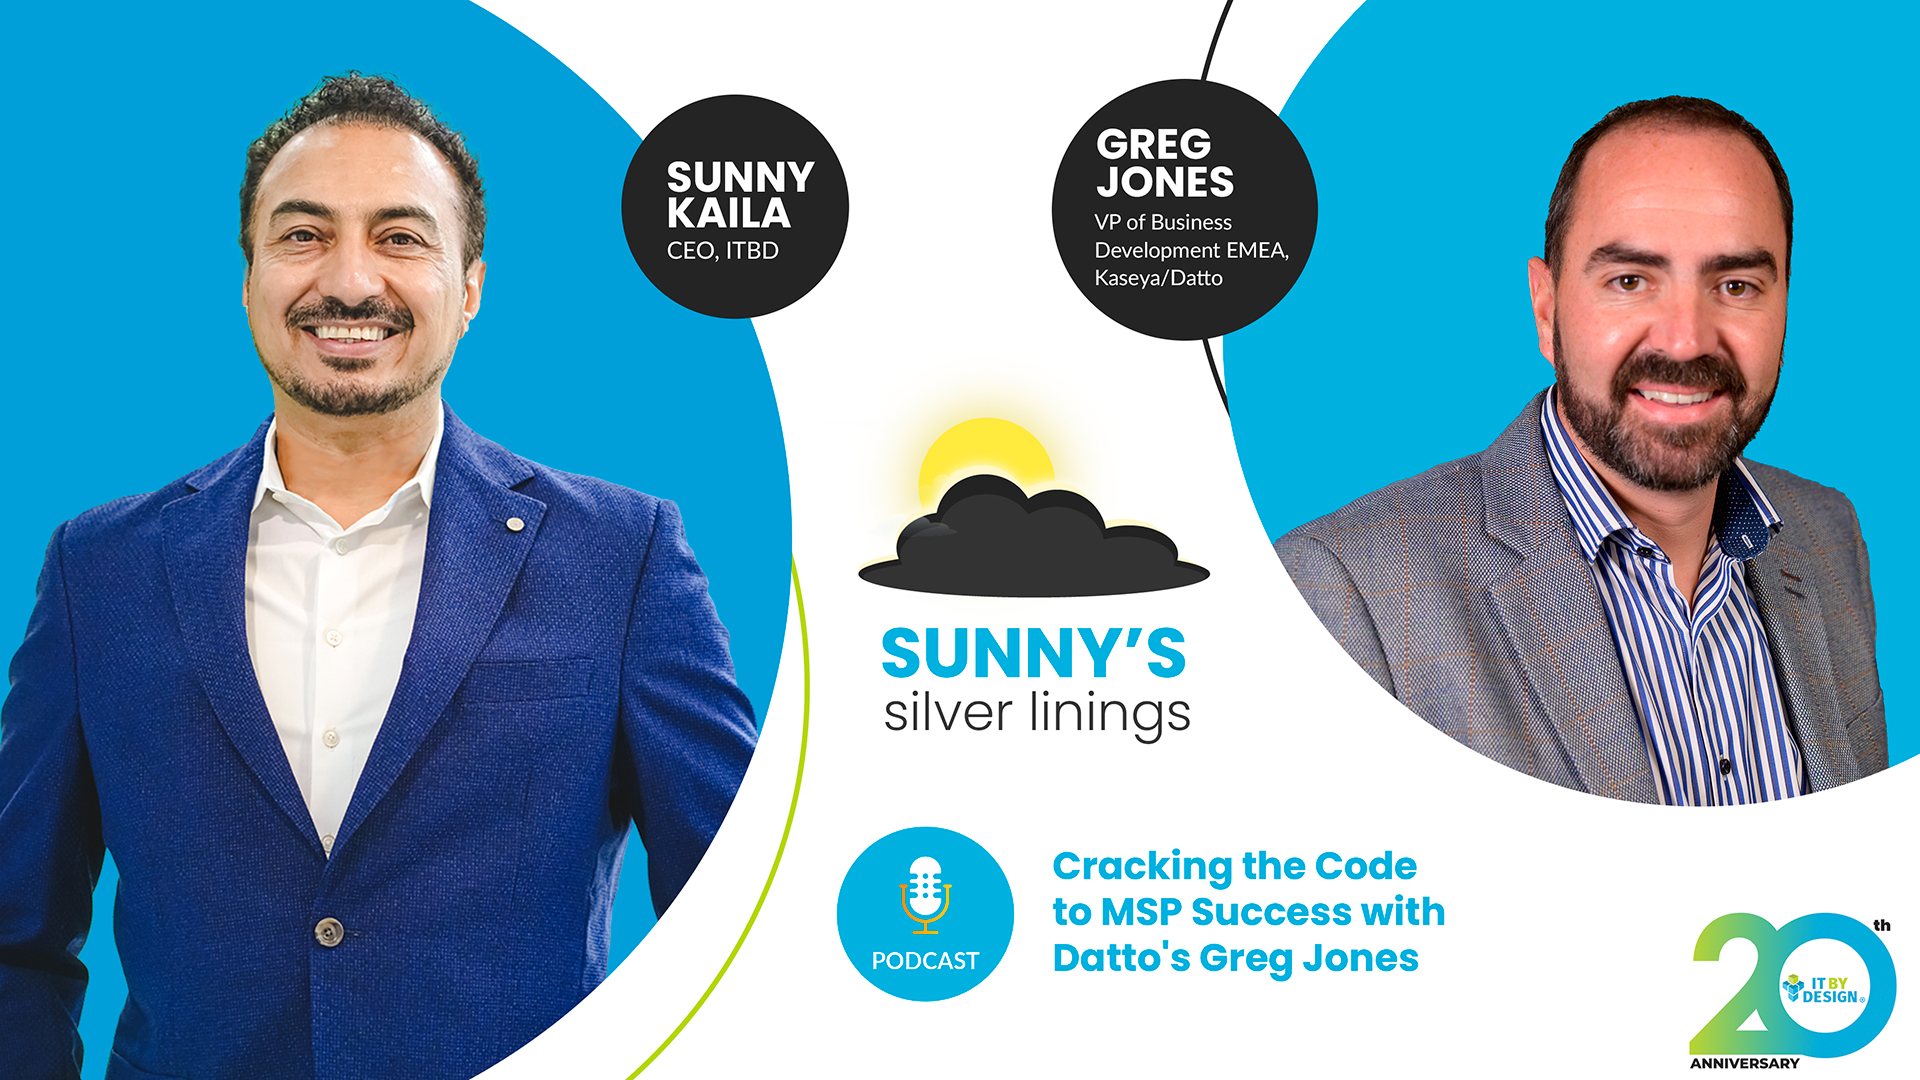 Cracking the Code to MSP Success with Datto's Greg Jones